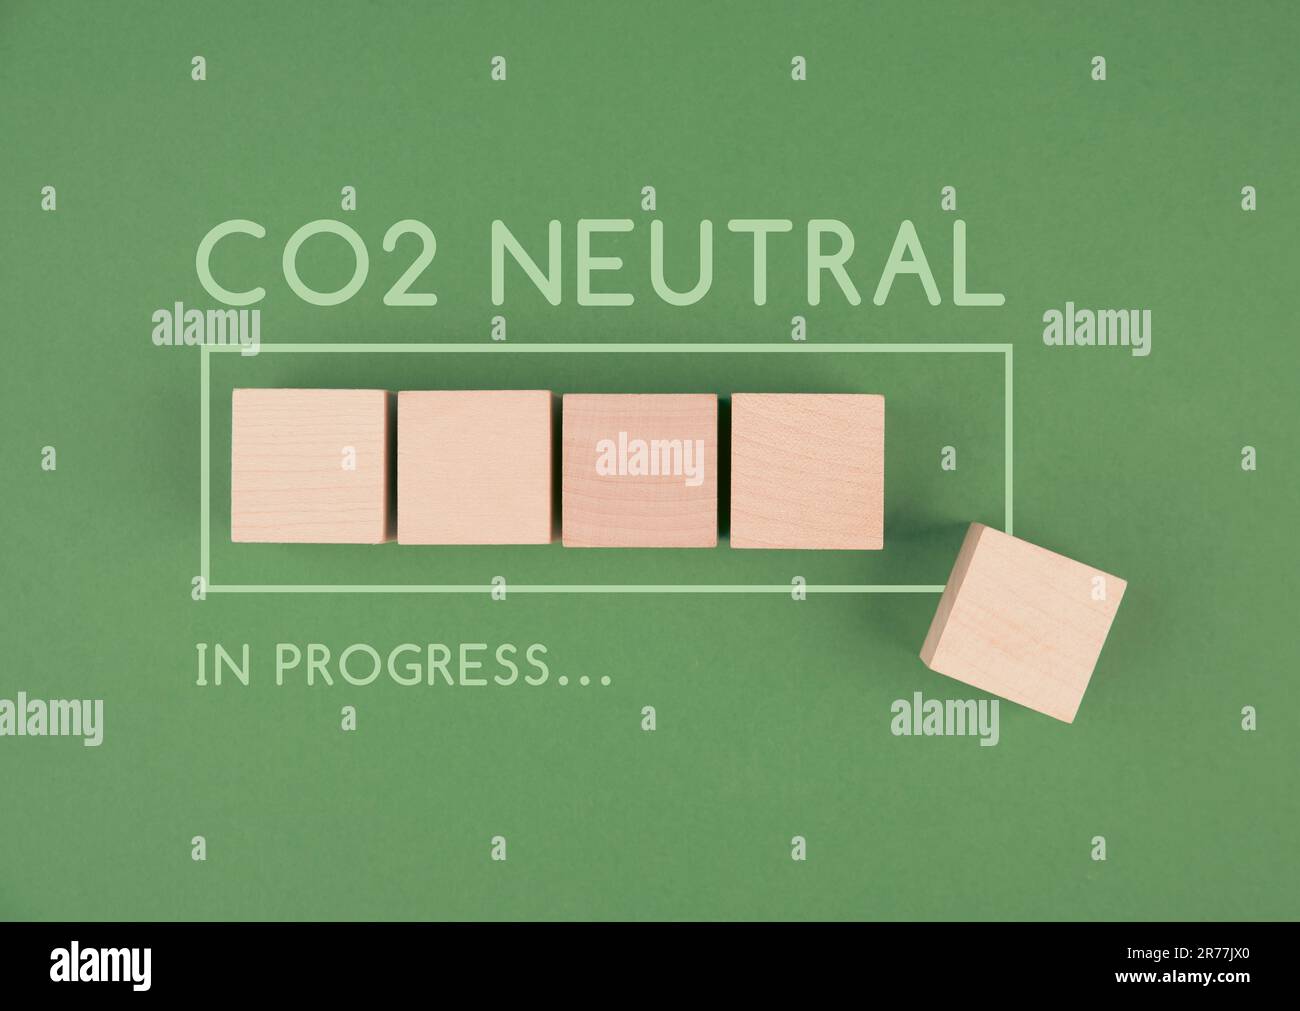 CO2 neutral in progress, loading bar for green energy, reduce carbon emission footprint, sustainable renewable electricity , environment protection Stock Photo